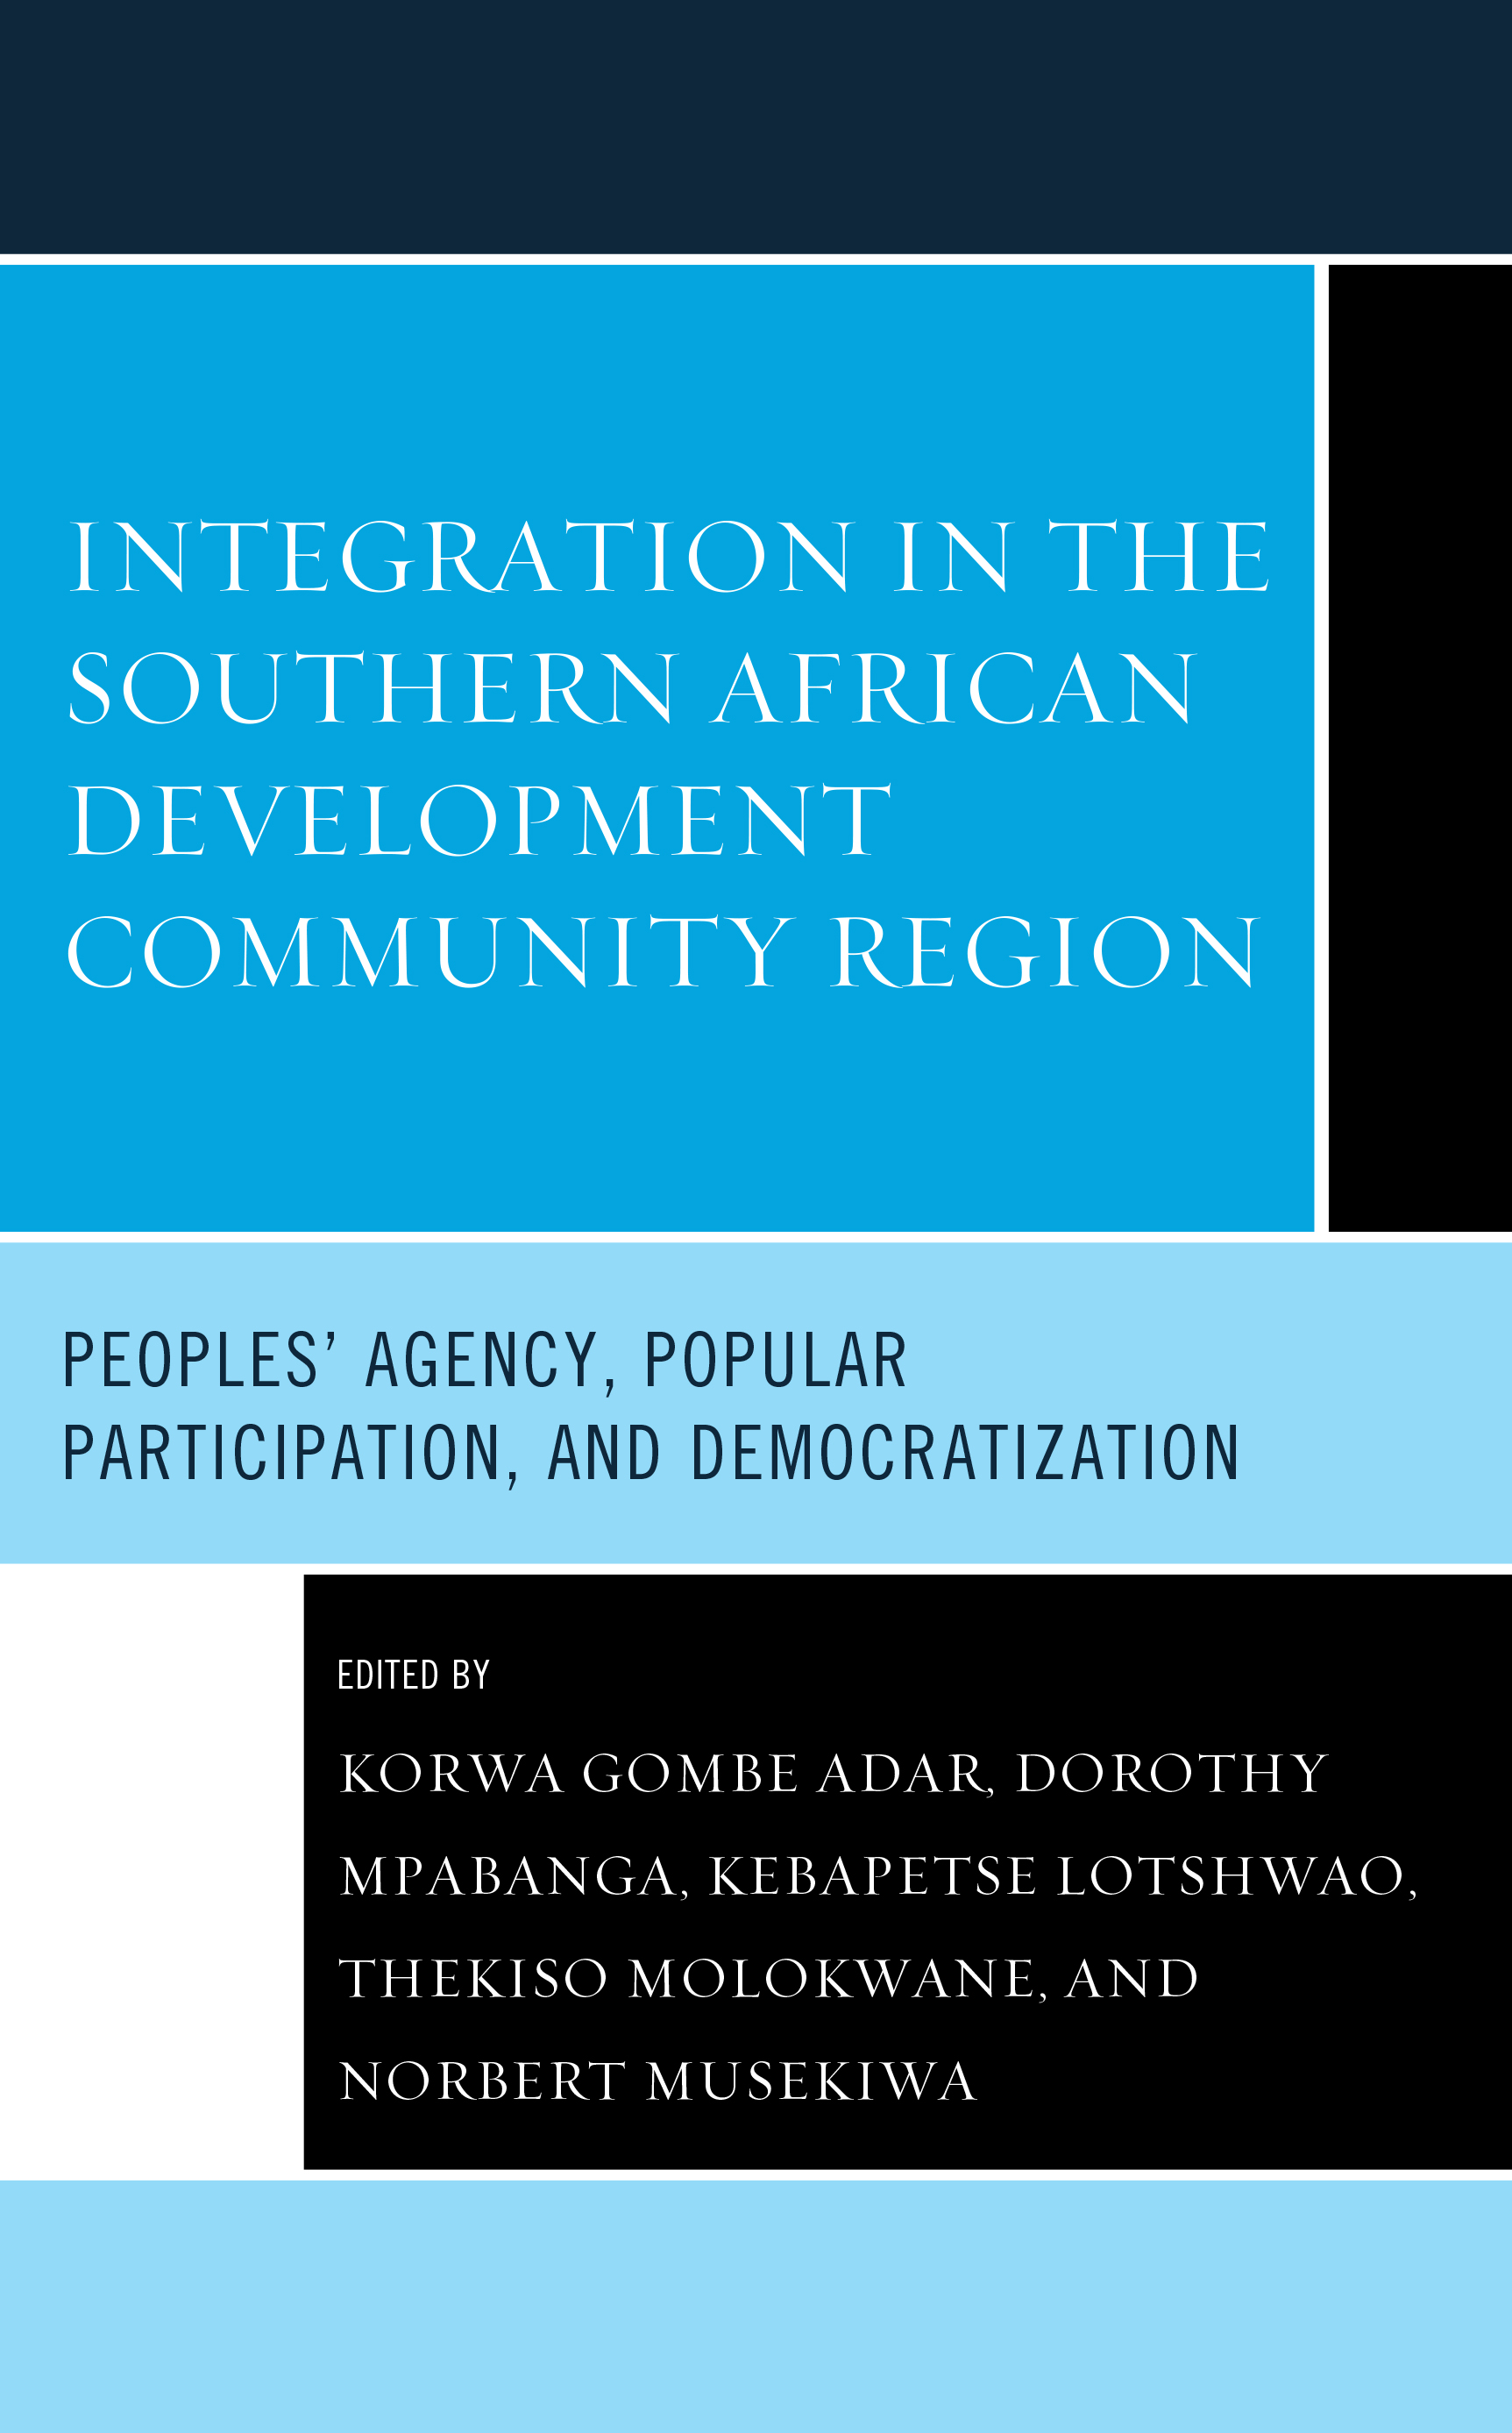 Integration in the Southern African Development Community Region: Peoples' Agency, Popular Participation, and Democratization